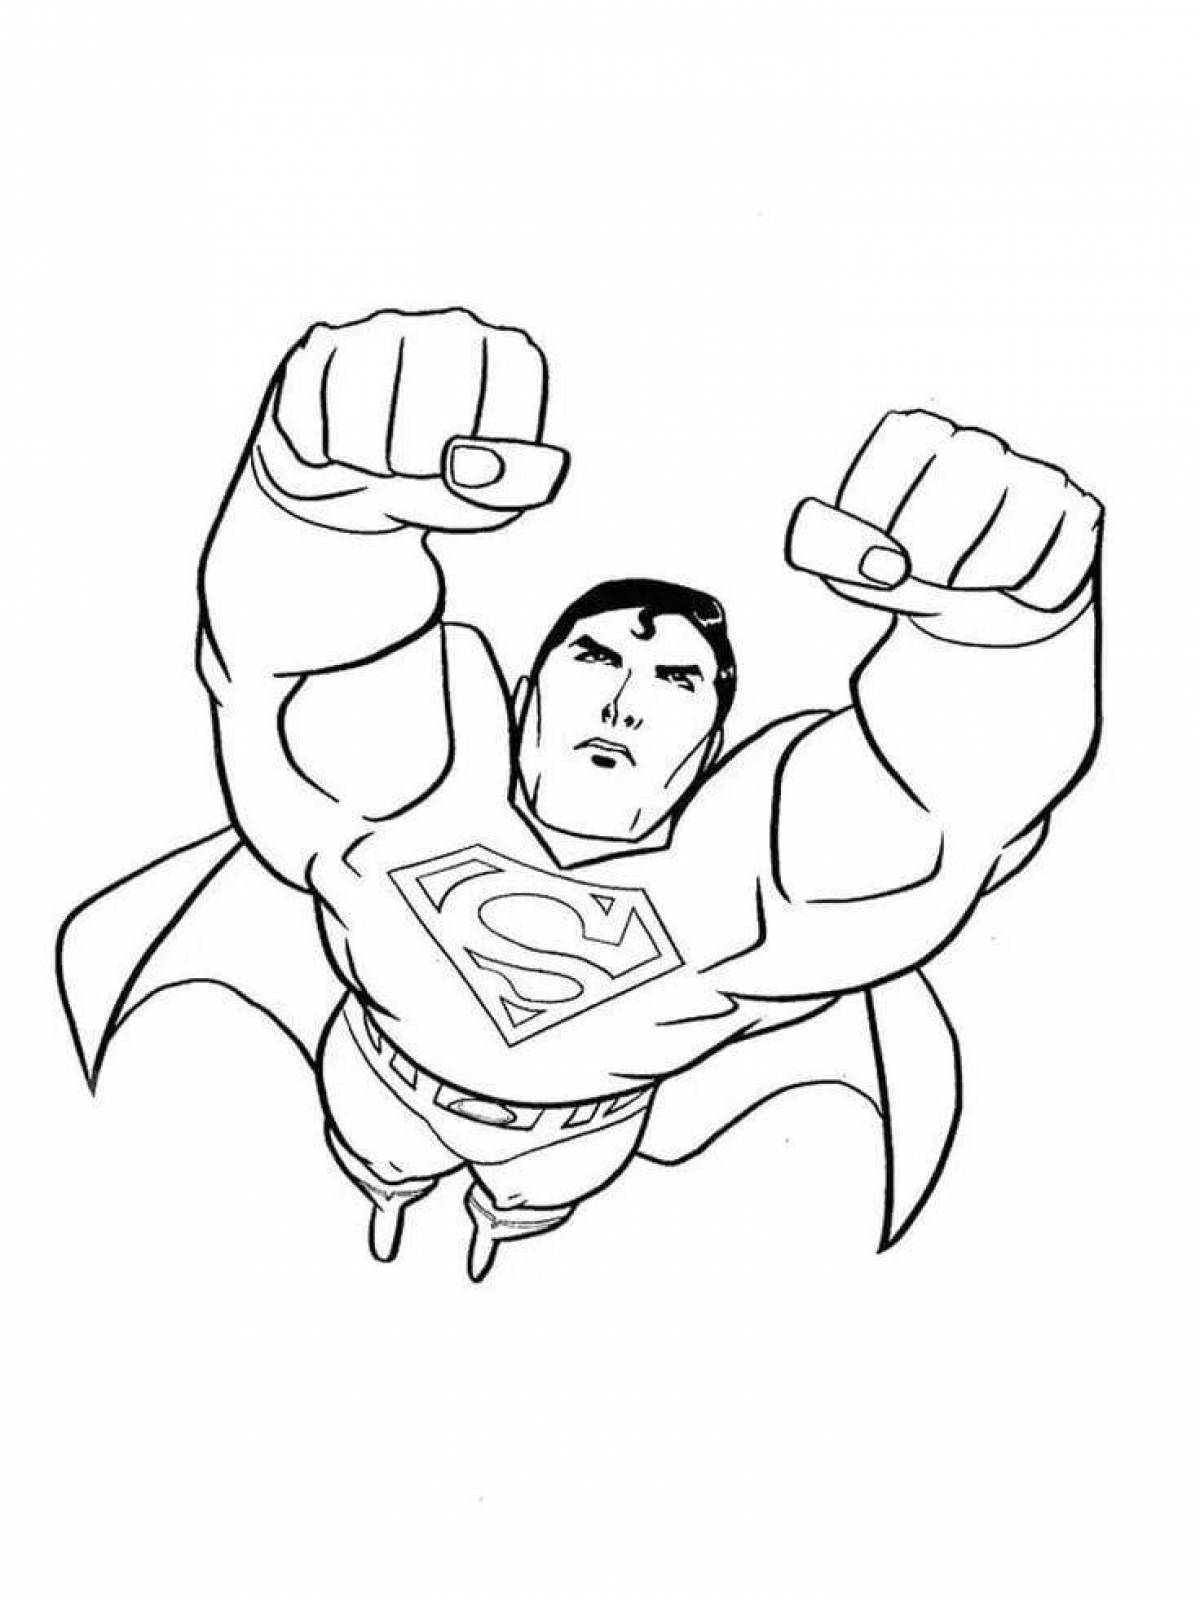 Creative superman coloring book for kids